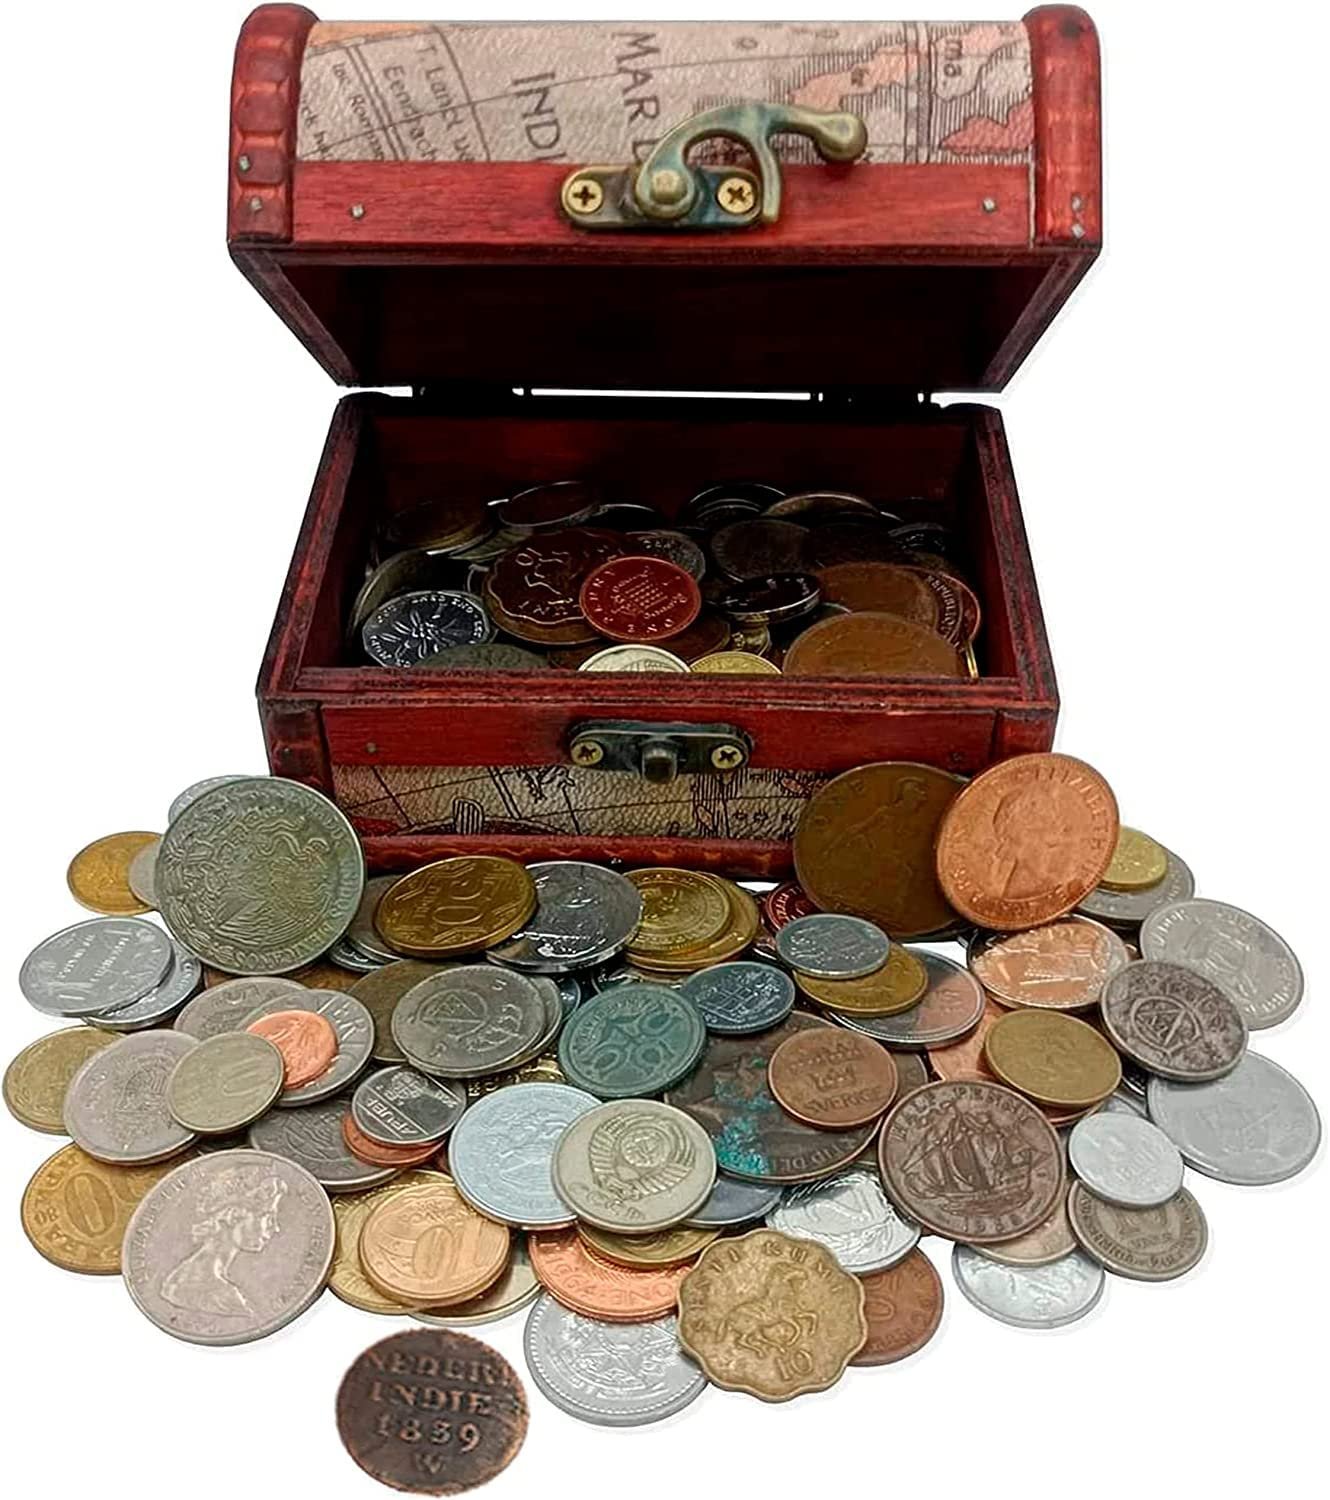 Top 9 Most Expensive Rare Coins Wanted By Collectors - Damia Global Services